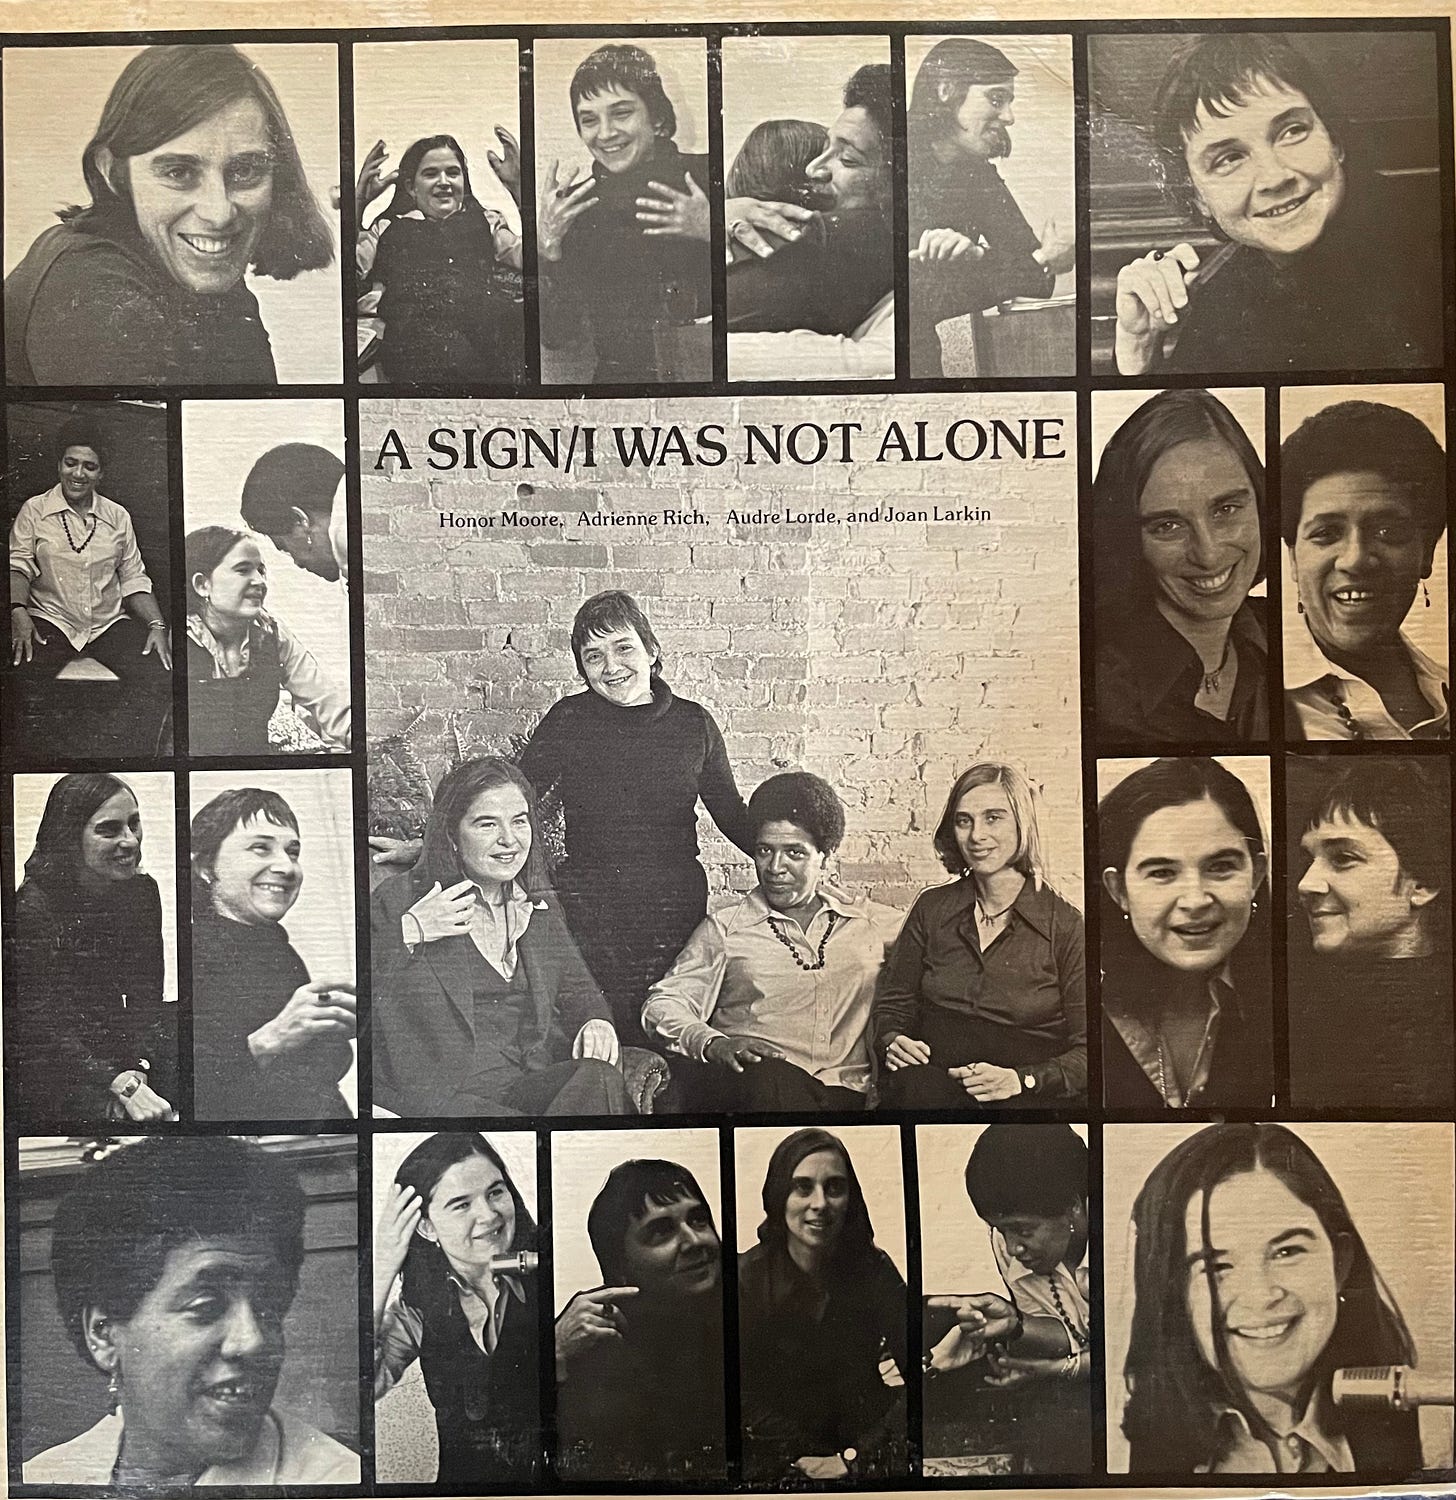 An album cover titled, "A Sign/I was Not Alone," with numerous joyous photos of the poets, individually and together, gesturing, huging one another; these brim a central photograph of all four in which Adrienne Rich stands behind Honor Moore and Audre Lorde who are seated next to Joan Larkin. 